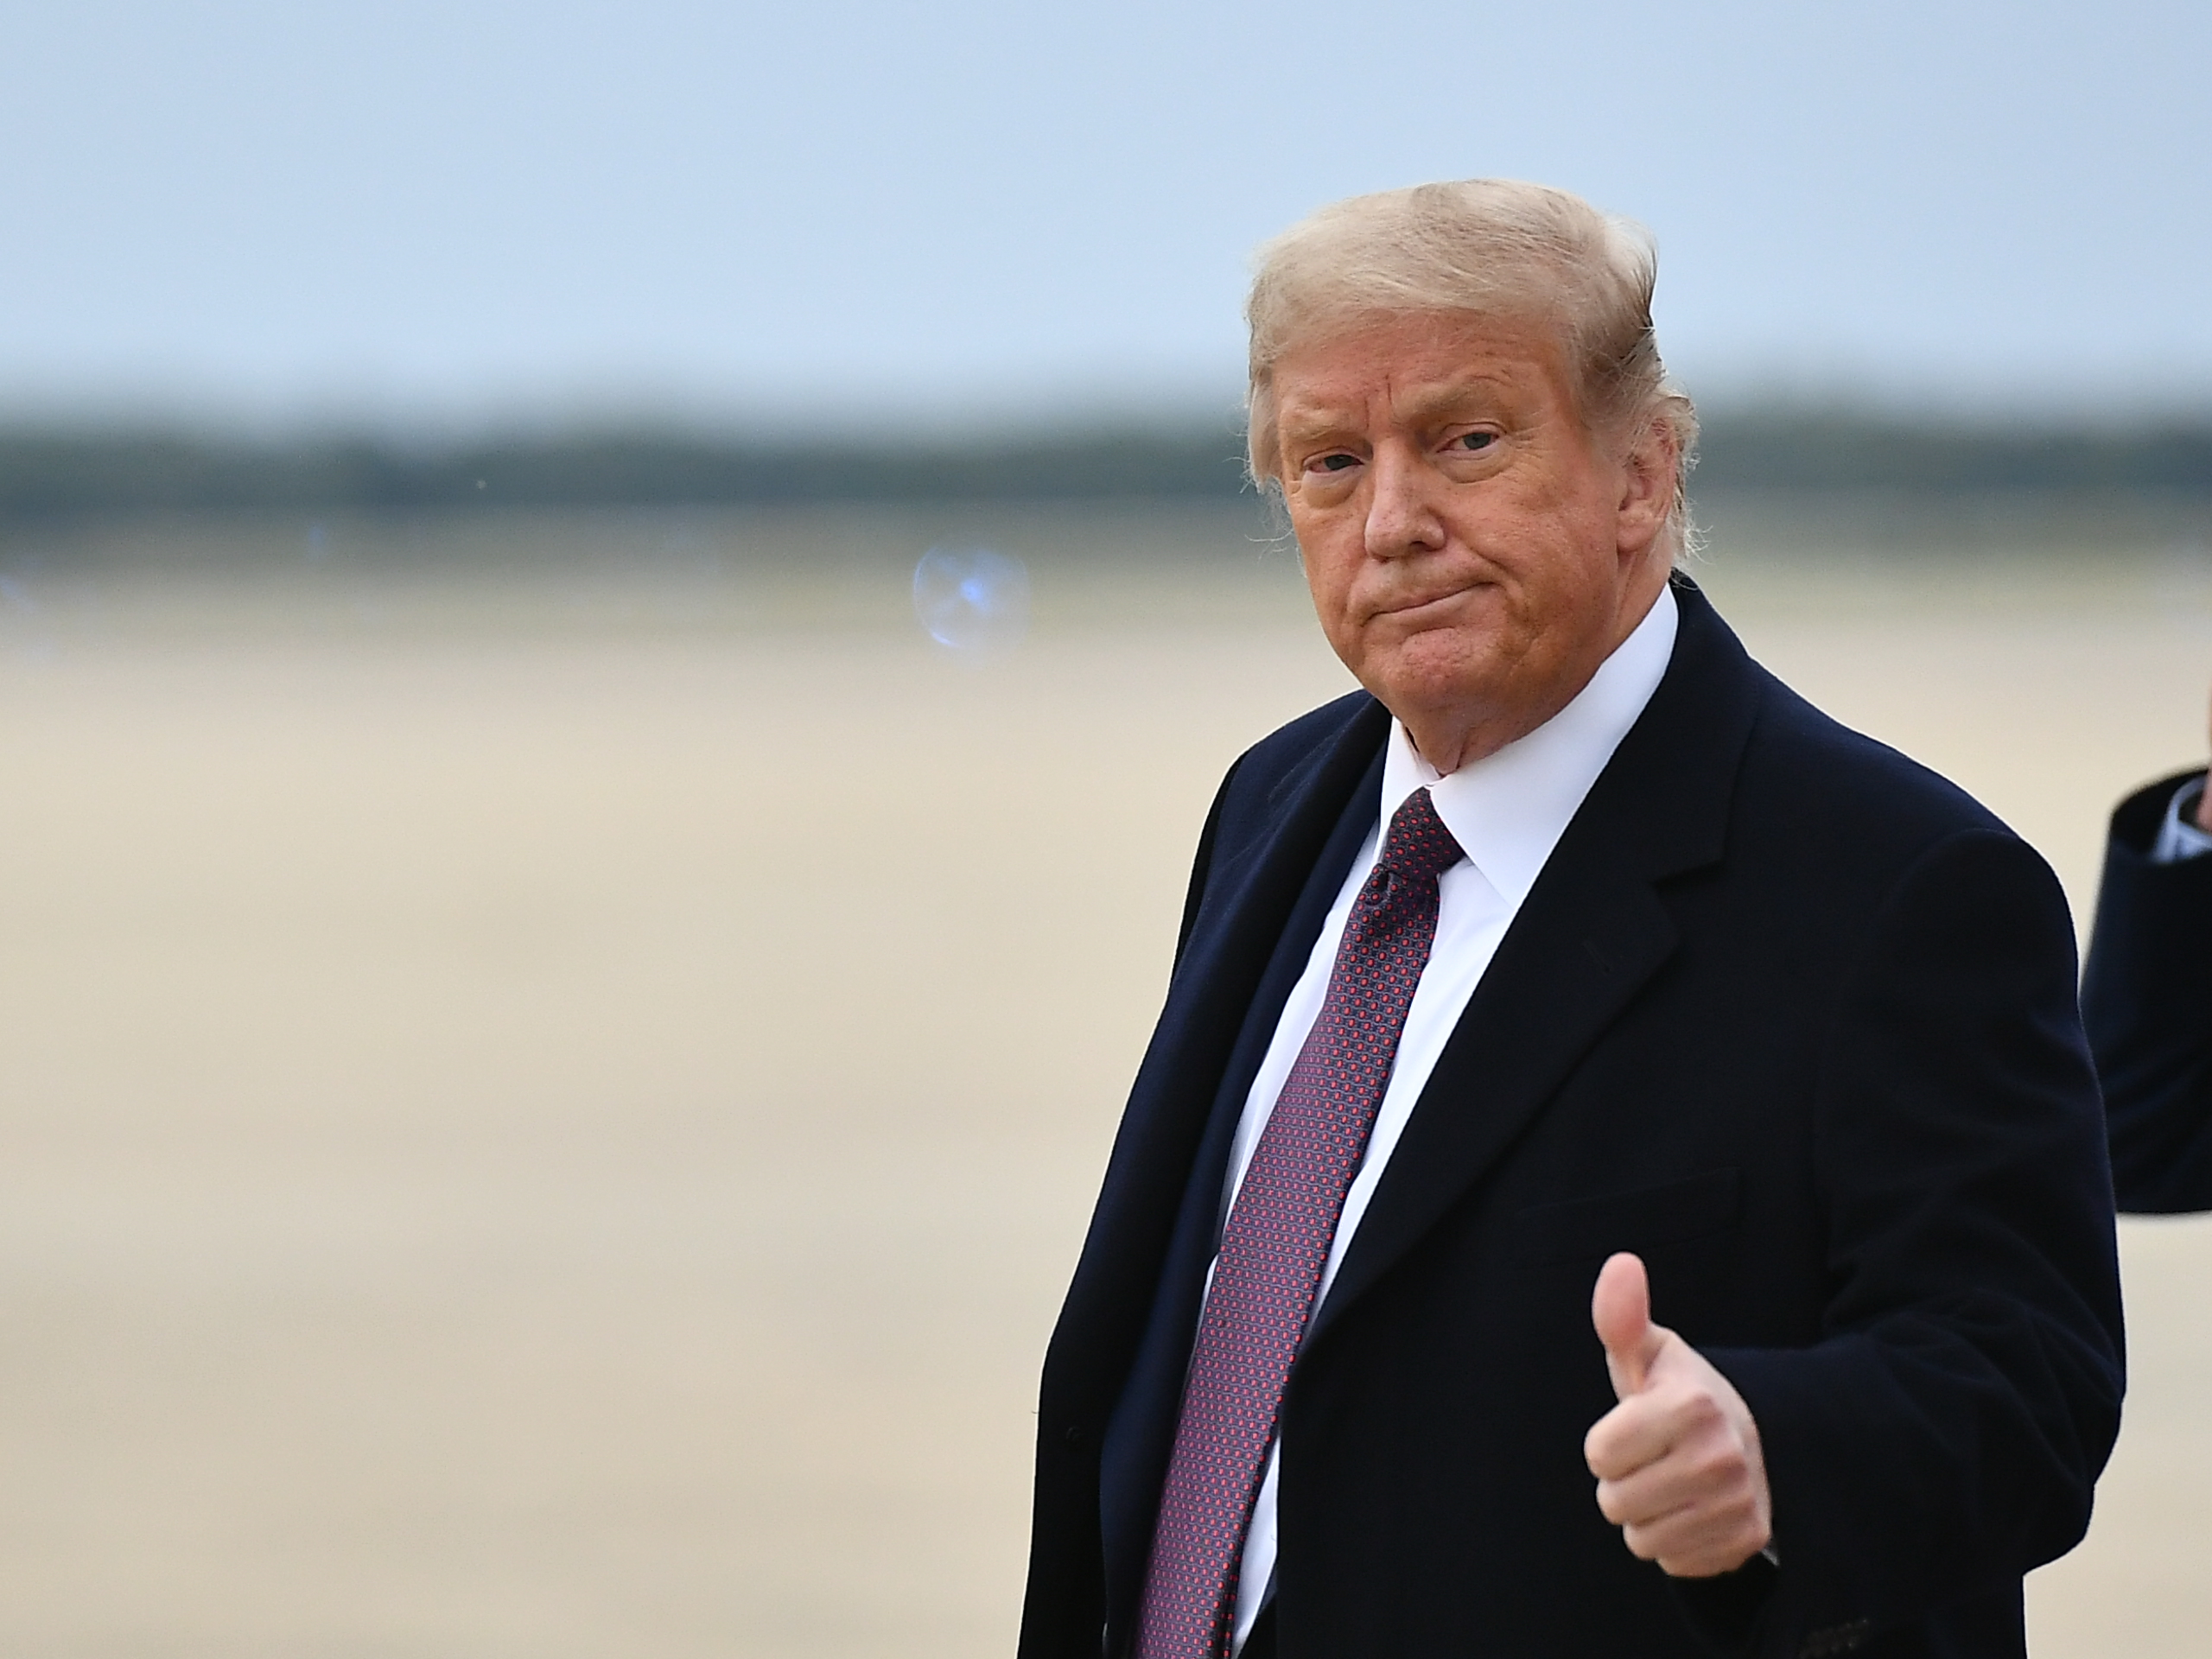 President Donald Trump gives a thumbs up as he steps off Air Force One upon arrival at Andrews Air Force Base in Maryland on October 1, 2020. (Mandel Ngan/AFP via Getty Images)